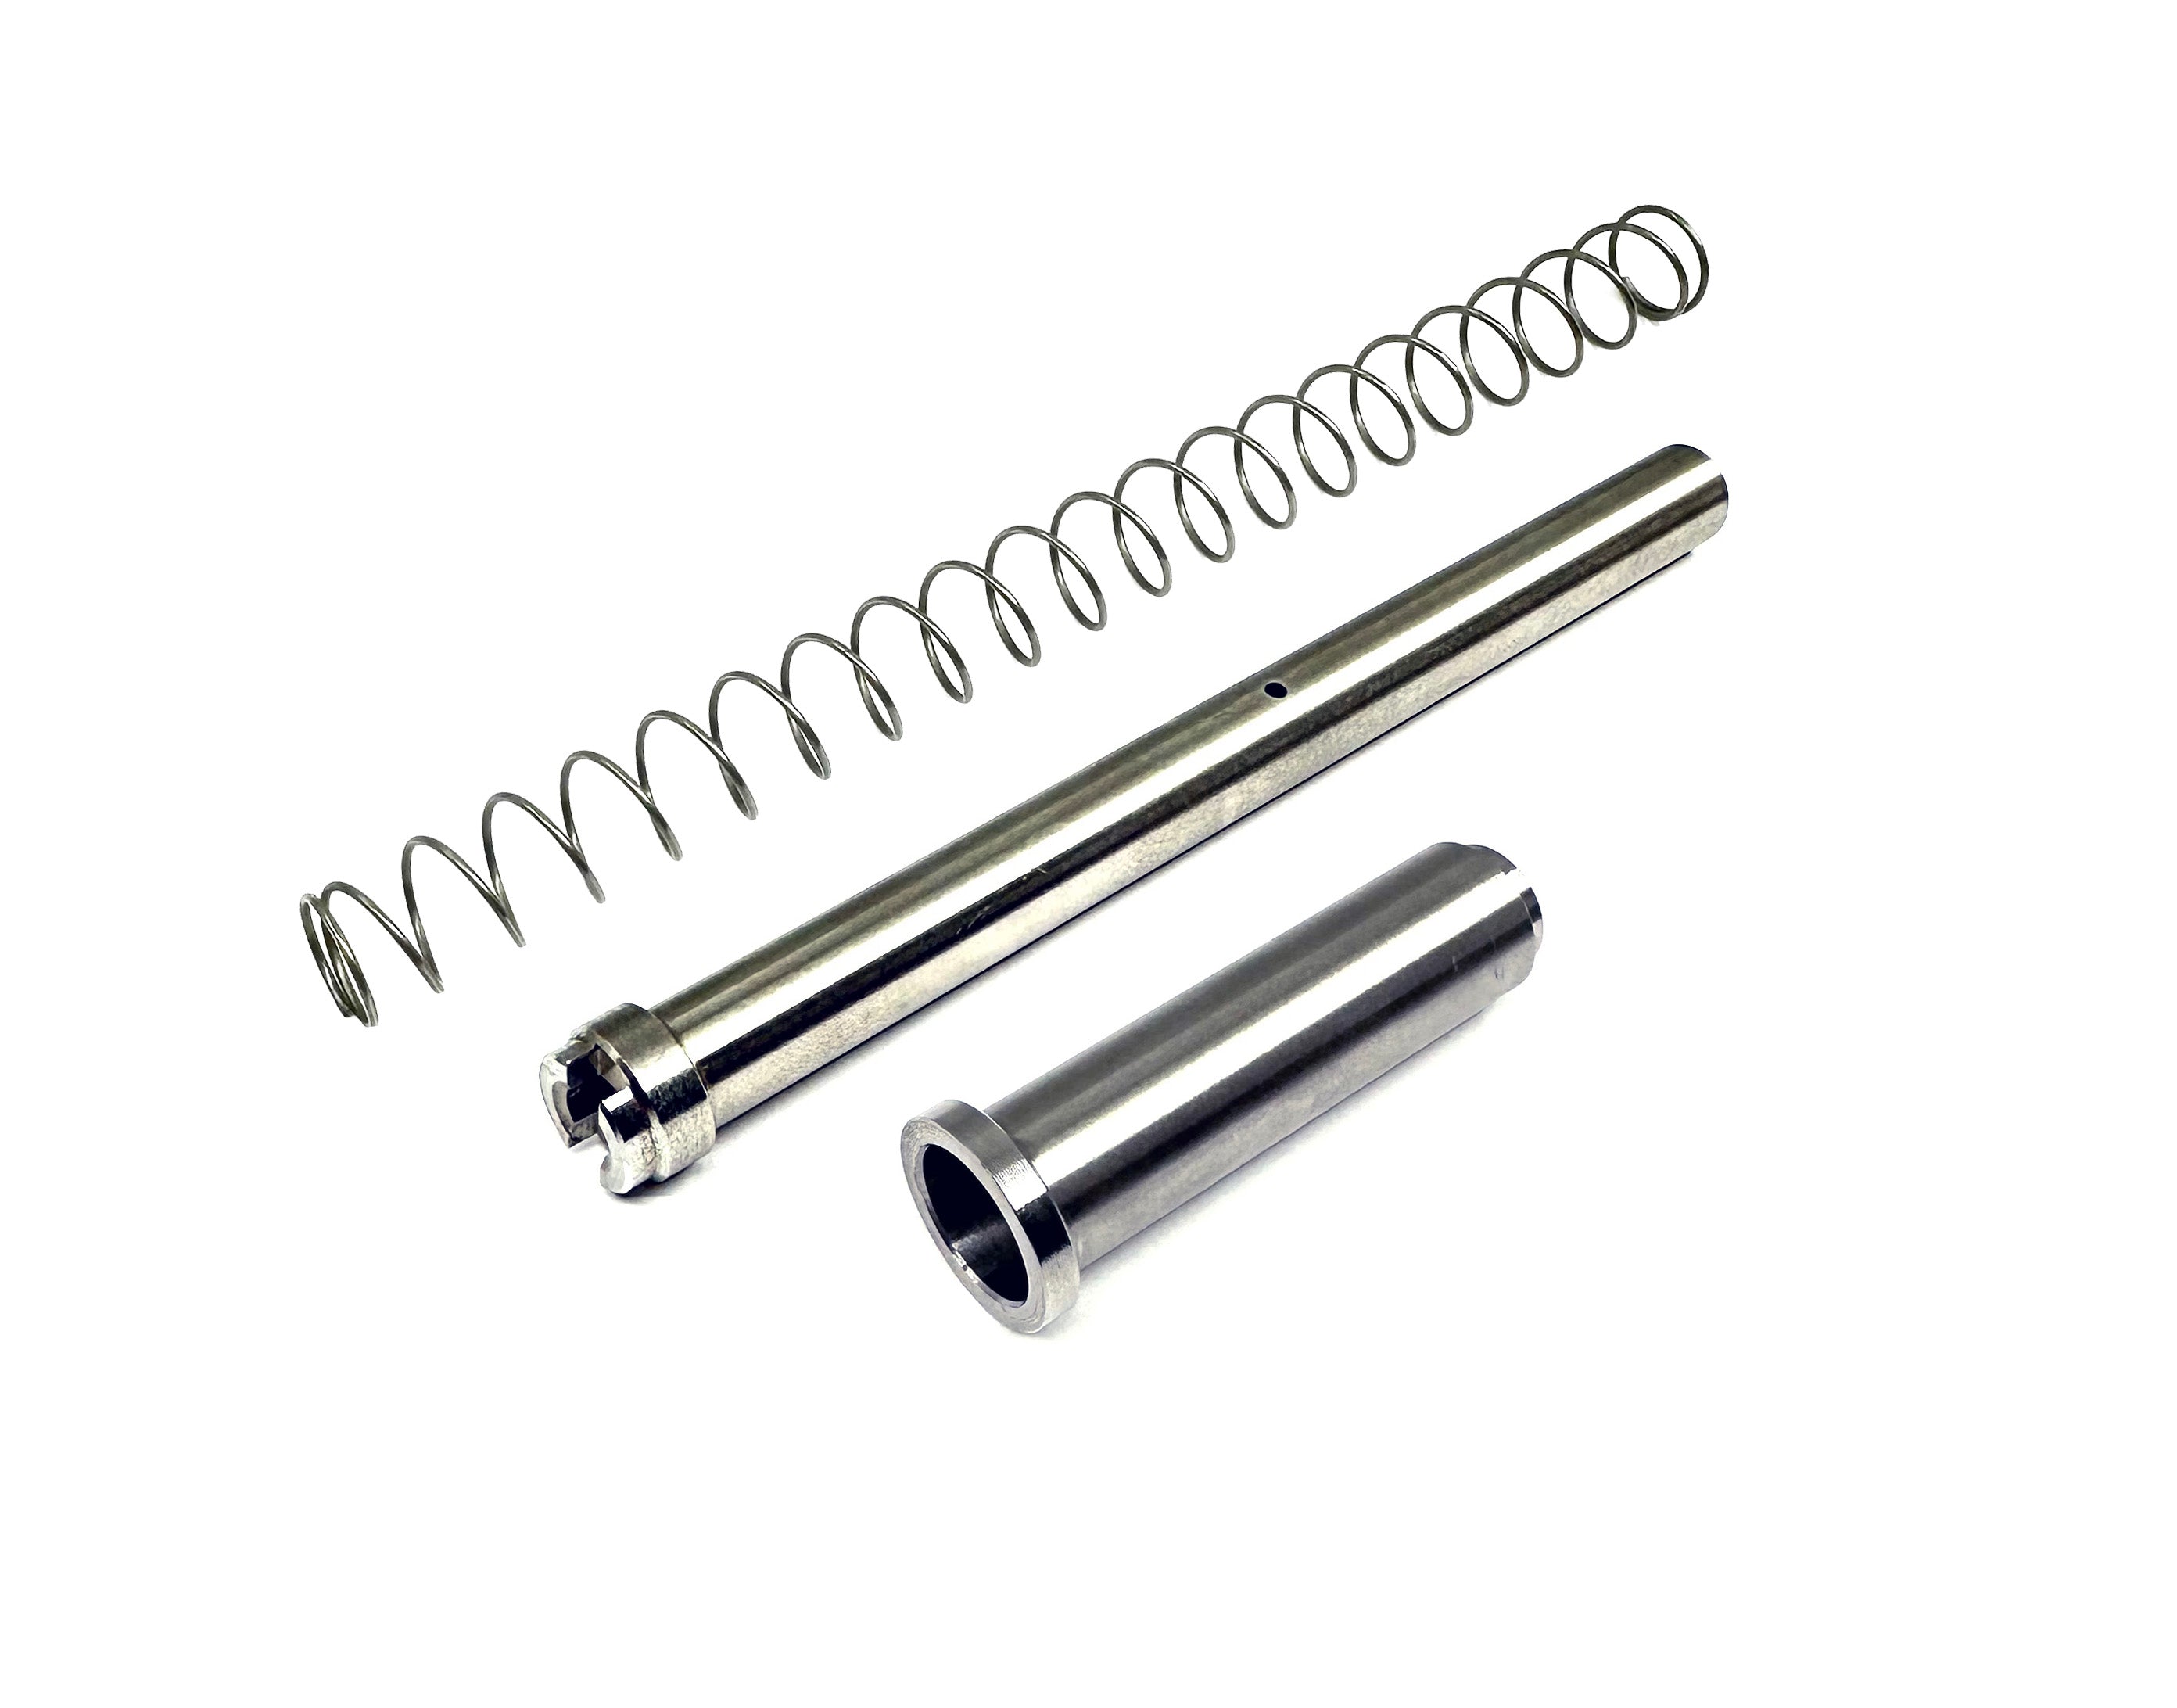 Pro Arms 130% Stainless Steel Recoil Rod Set - VFC 1911 Kimber